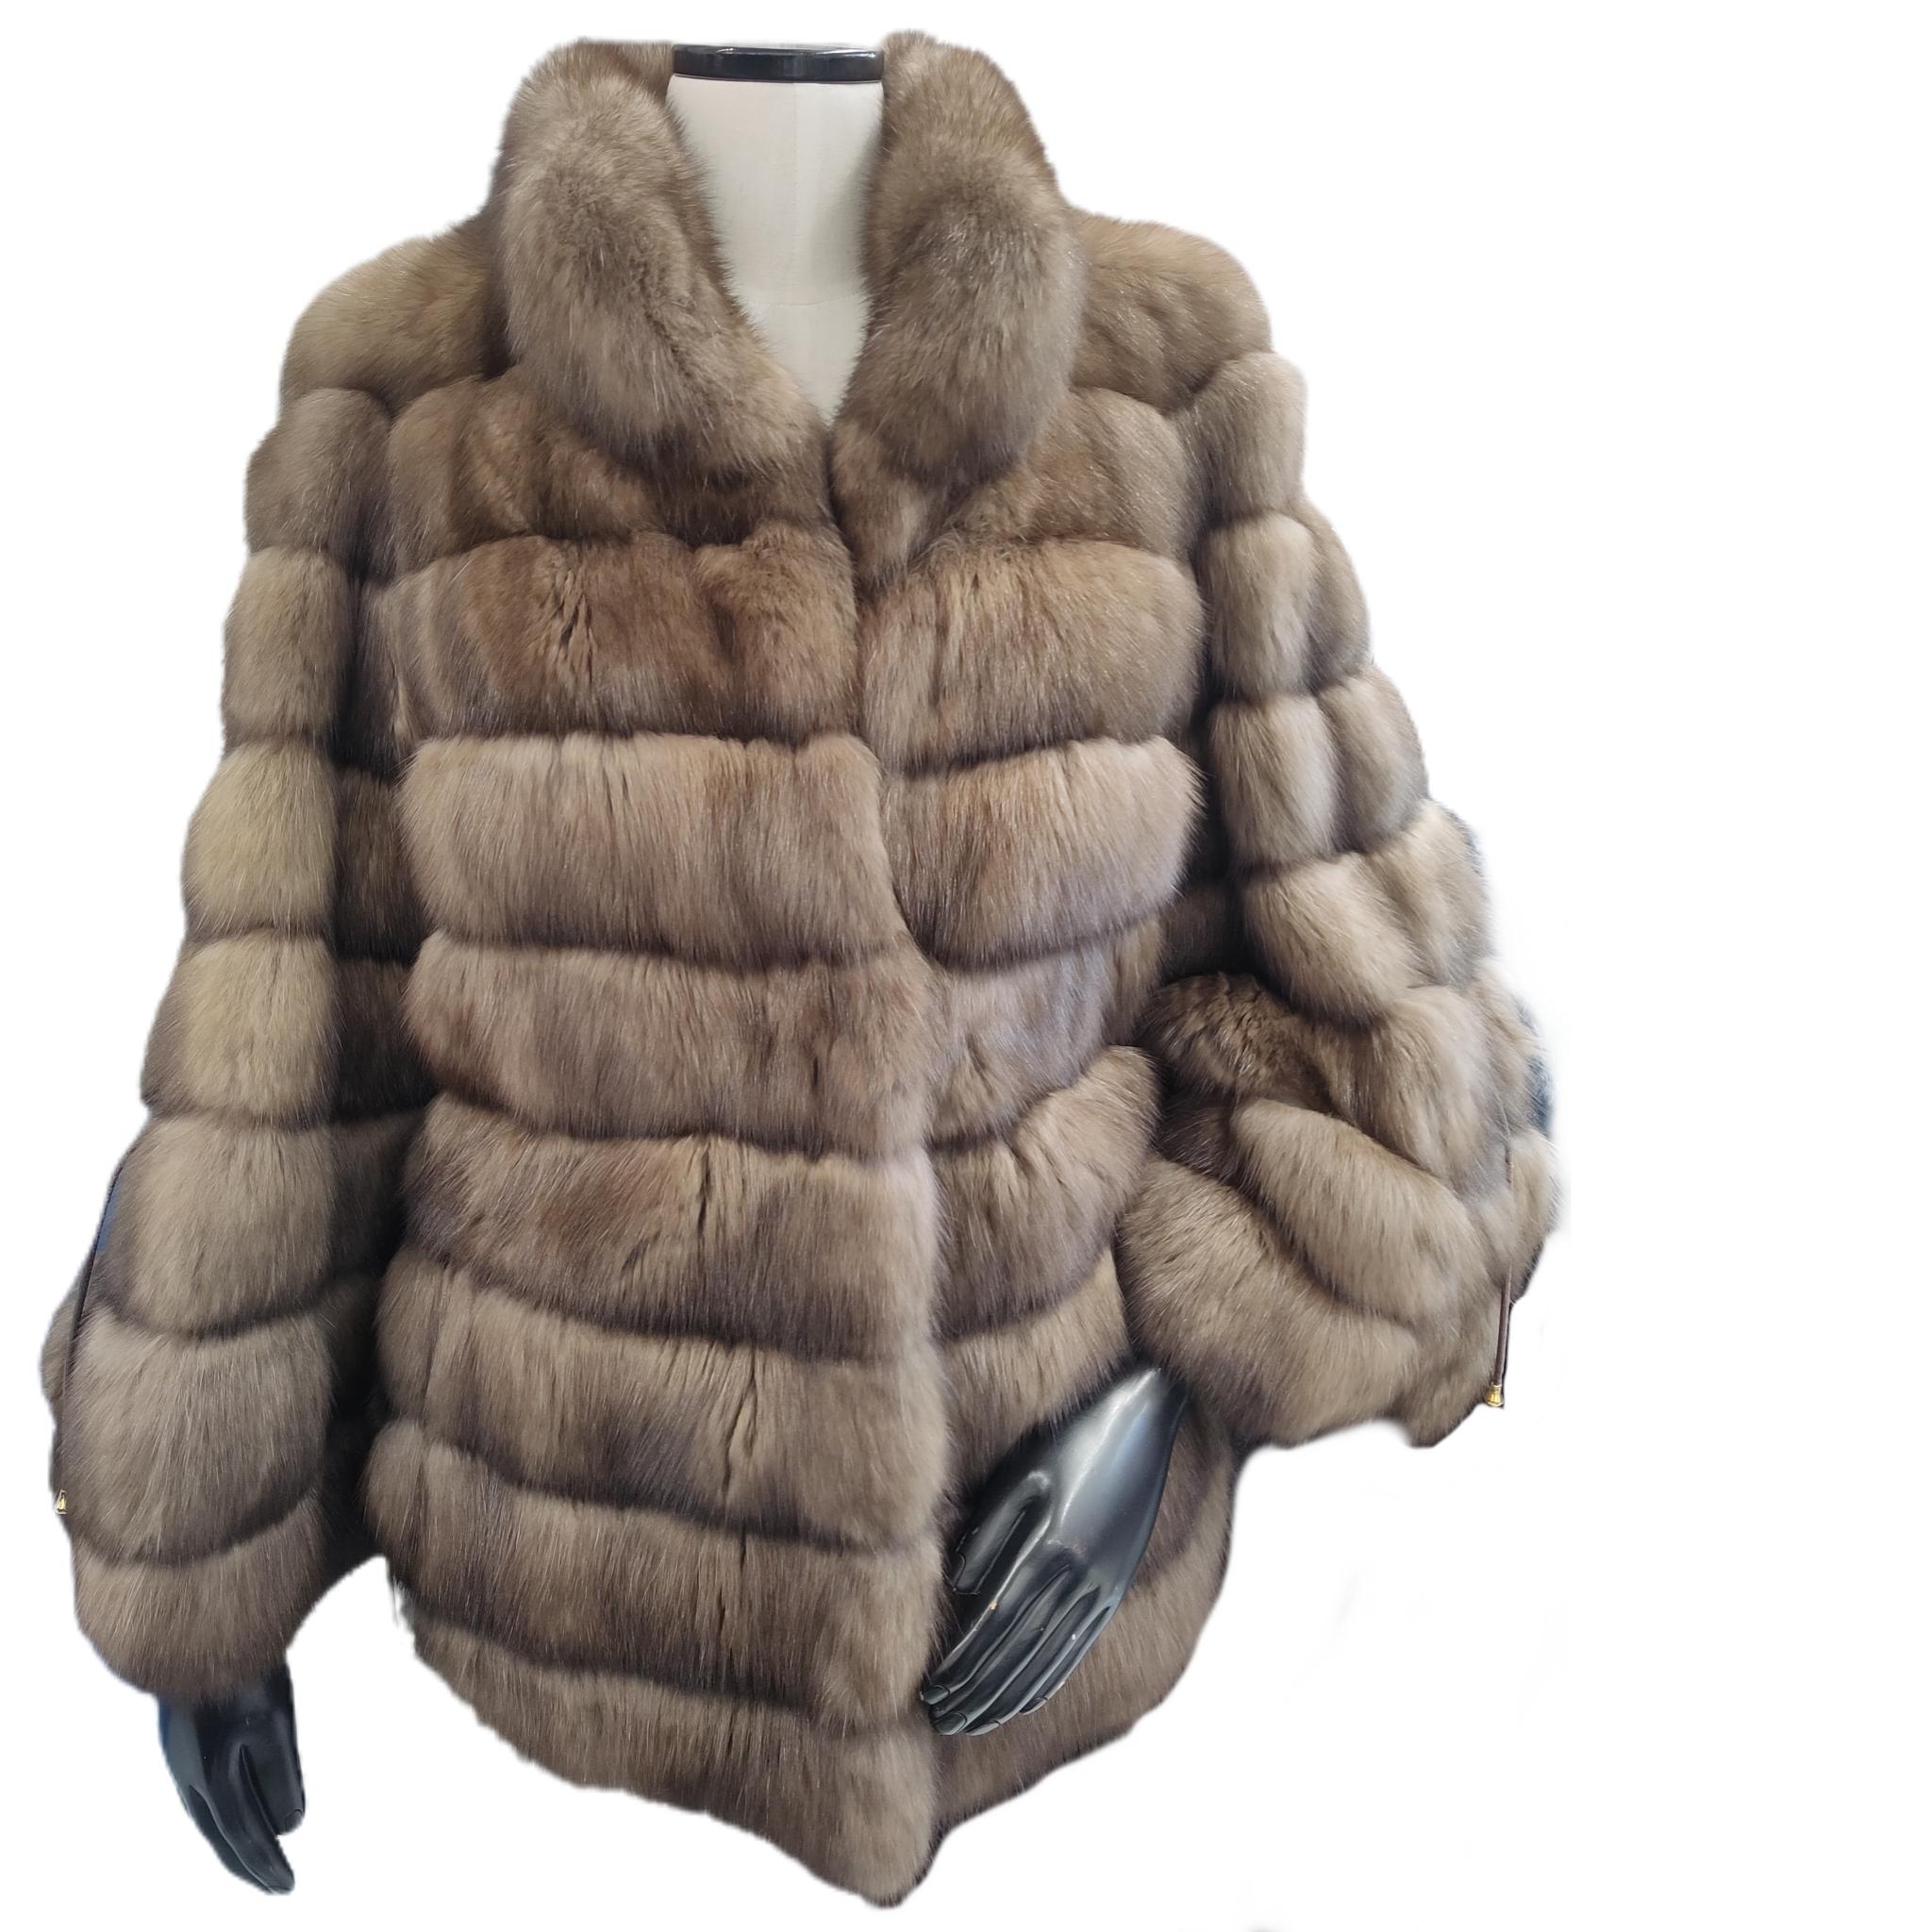 PRODUCT DESCRIPTION:

Brand new Christian Dior luxurious sable fur coat 

Condition: Brand New

Closure: German hook

Color: Pastel

Material: Sable

Garment type: Coat

Sleeves: Long sleeves

Pockets: Two pockets

Collar: Oversized collar

Lining: